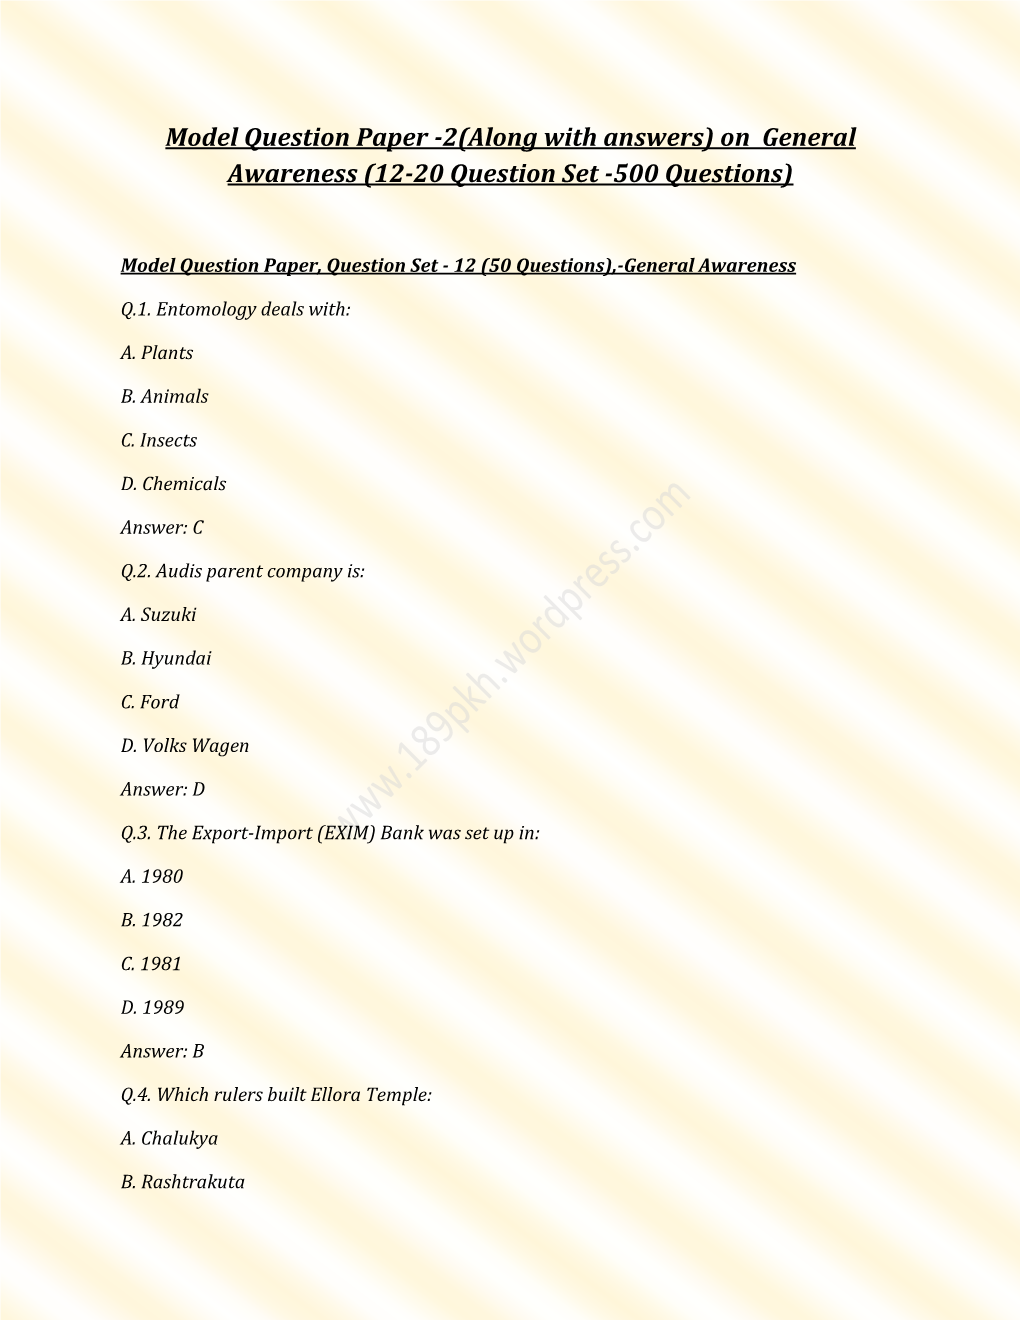 Model Question Paper -2(Along with Answers) on General Awareness (12-20 Question Set -500 Questions)